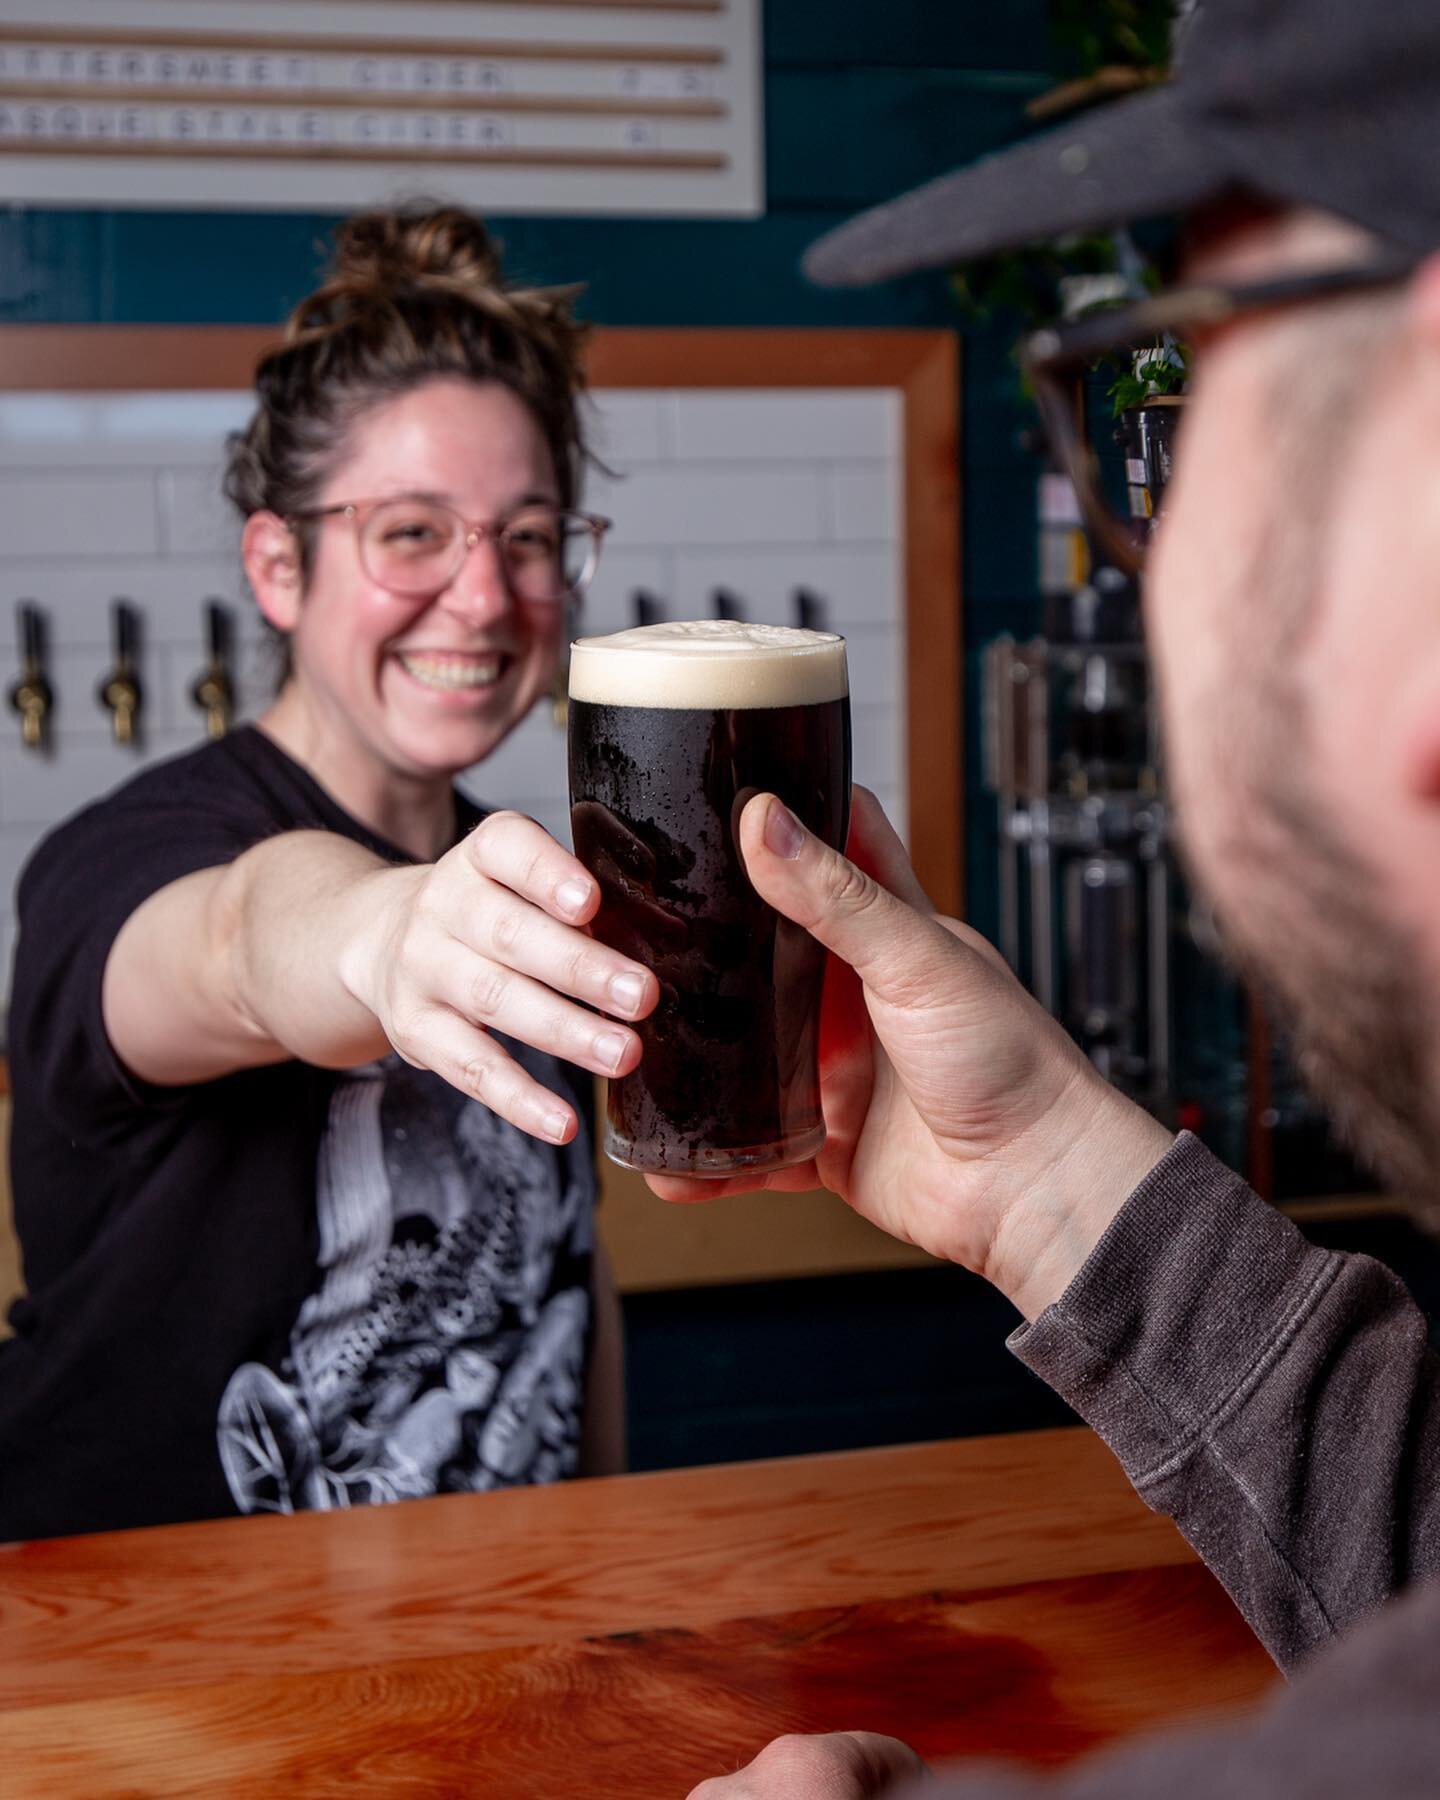 We got another little beer on tap! We&rsquo;re pleased to present Katie, our American dark mild collab with our buddies at Living H&auml;us. 
//
Katie was inspired by one of our favorite sessionable English styles, but with lots of cool American ingr